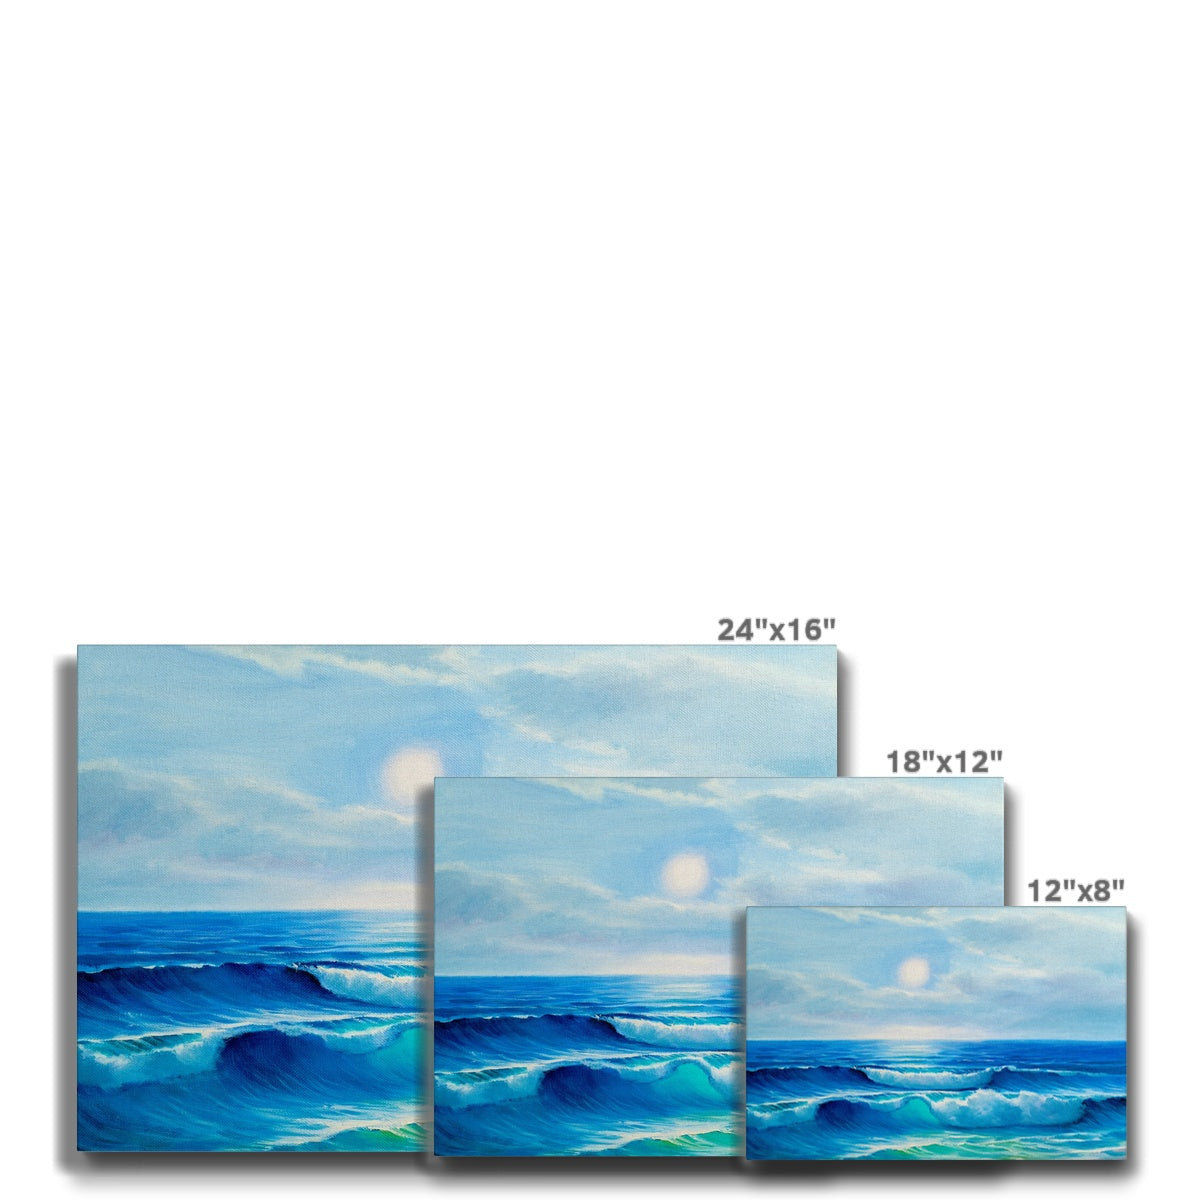 Abstract Ocean & Sky Oil Painting Canvas